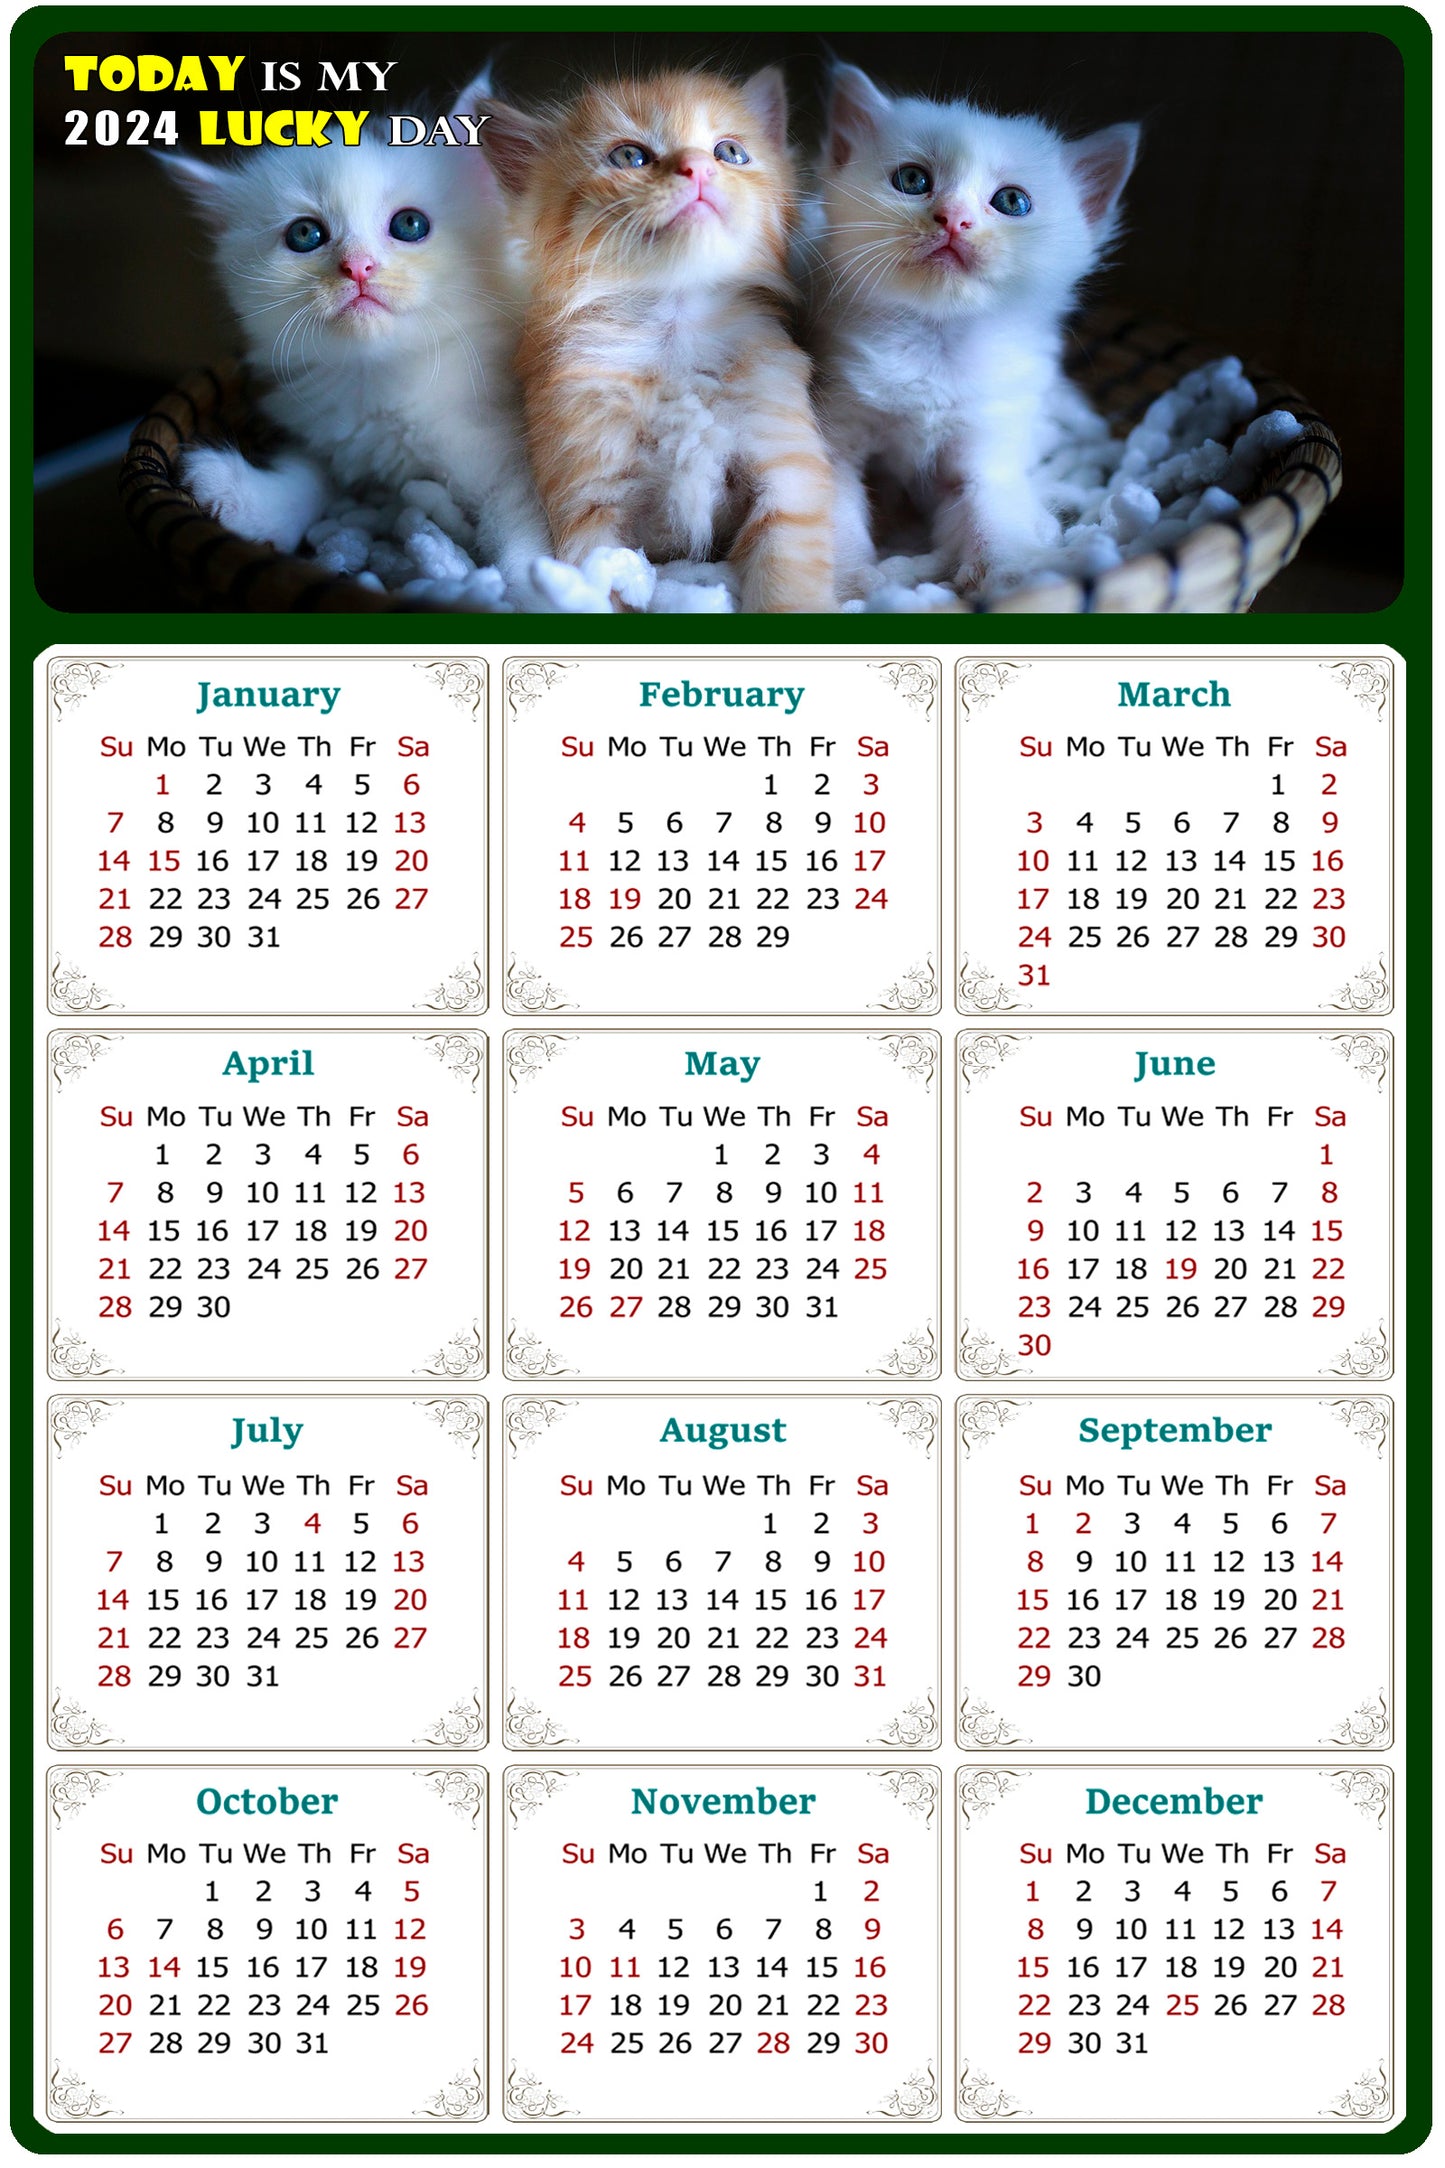 2024 Magnetic Calendar - Today is My Lucky Day (Fade, Tear, and Water Resistant)- Cat Themed 011